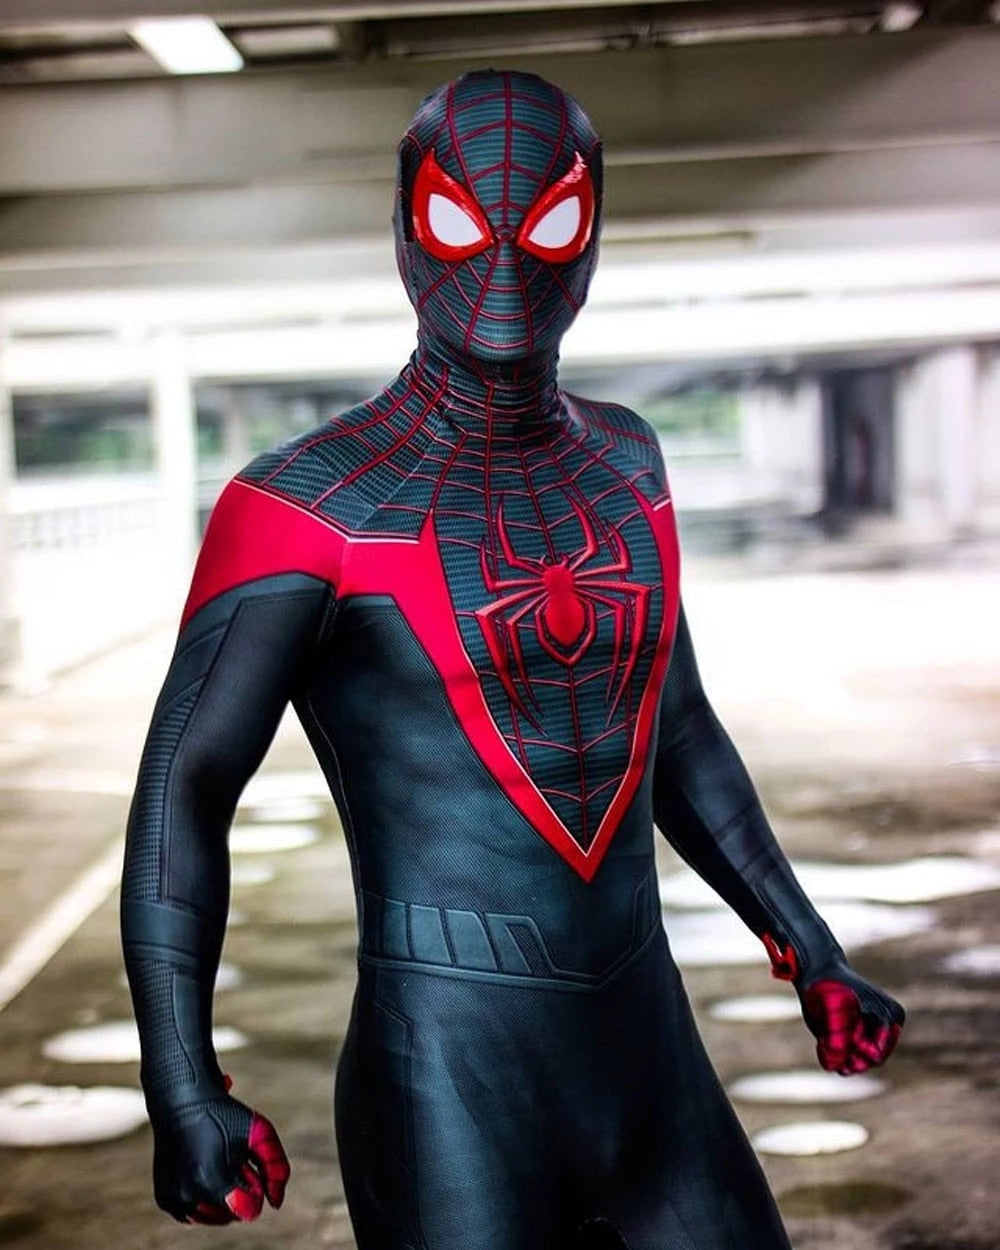 The New Spiderman PS5 Costume - The GoatFind